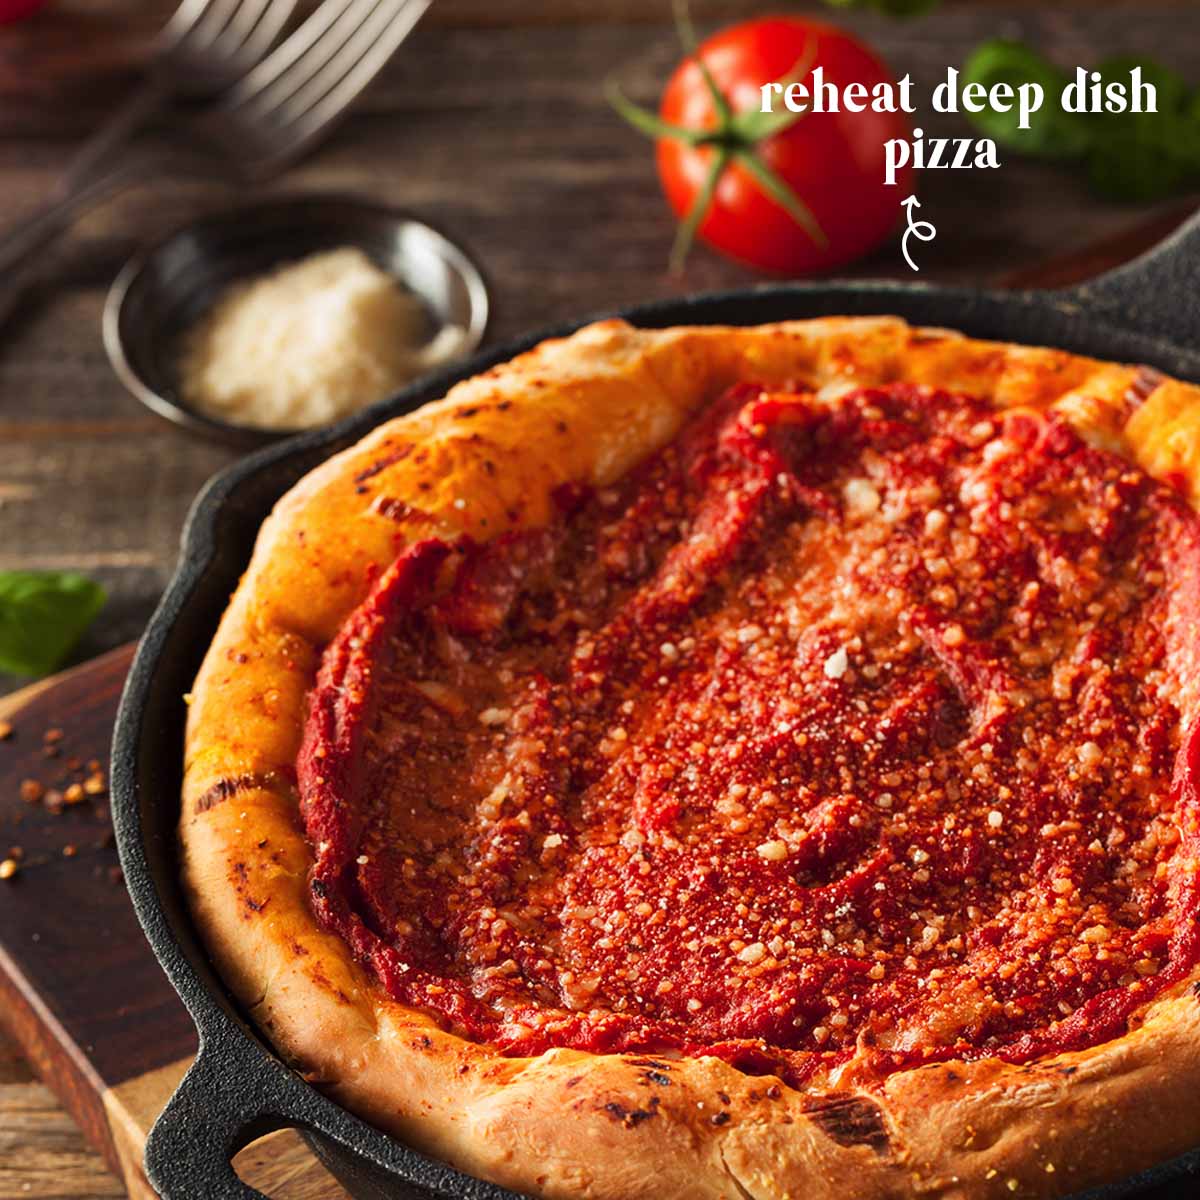 Chicago-style deep dish pizza calls for a special method of reheating deep dish pizza, and it all comes down to one magic word: skillet